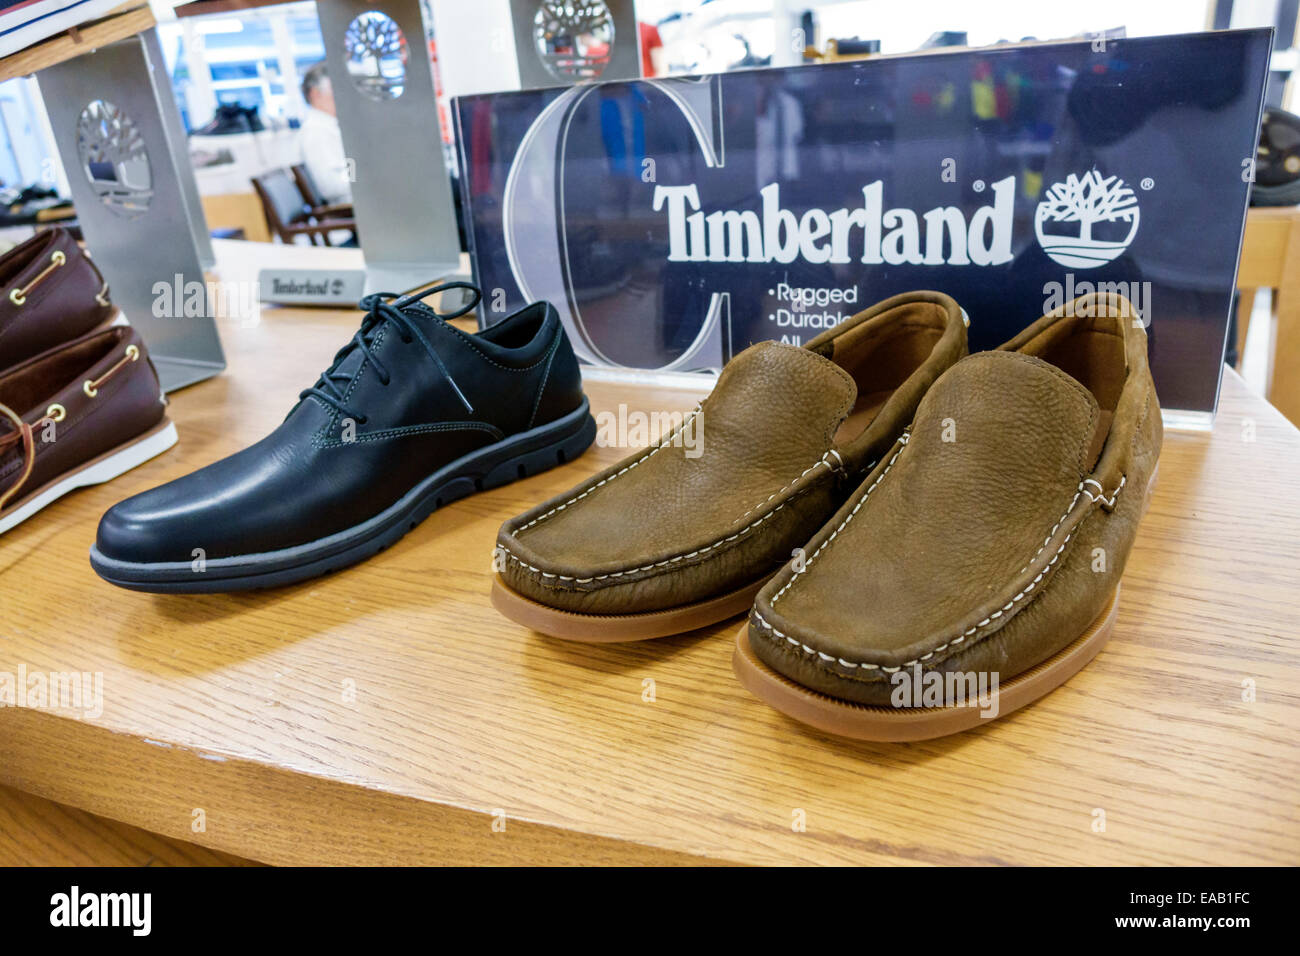 timberland shoes shop